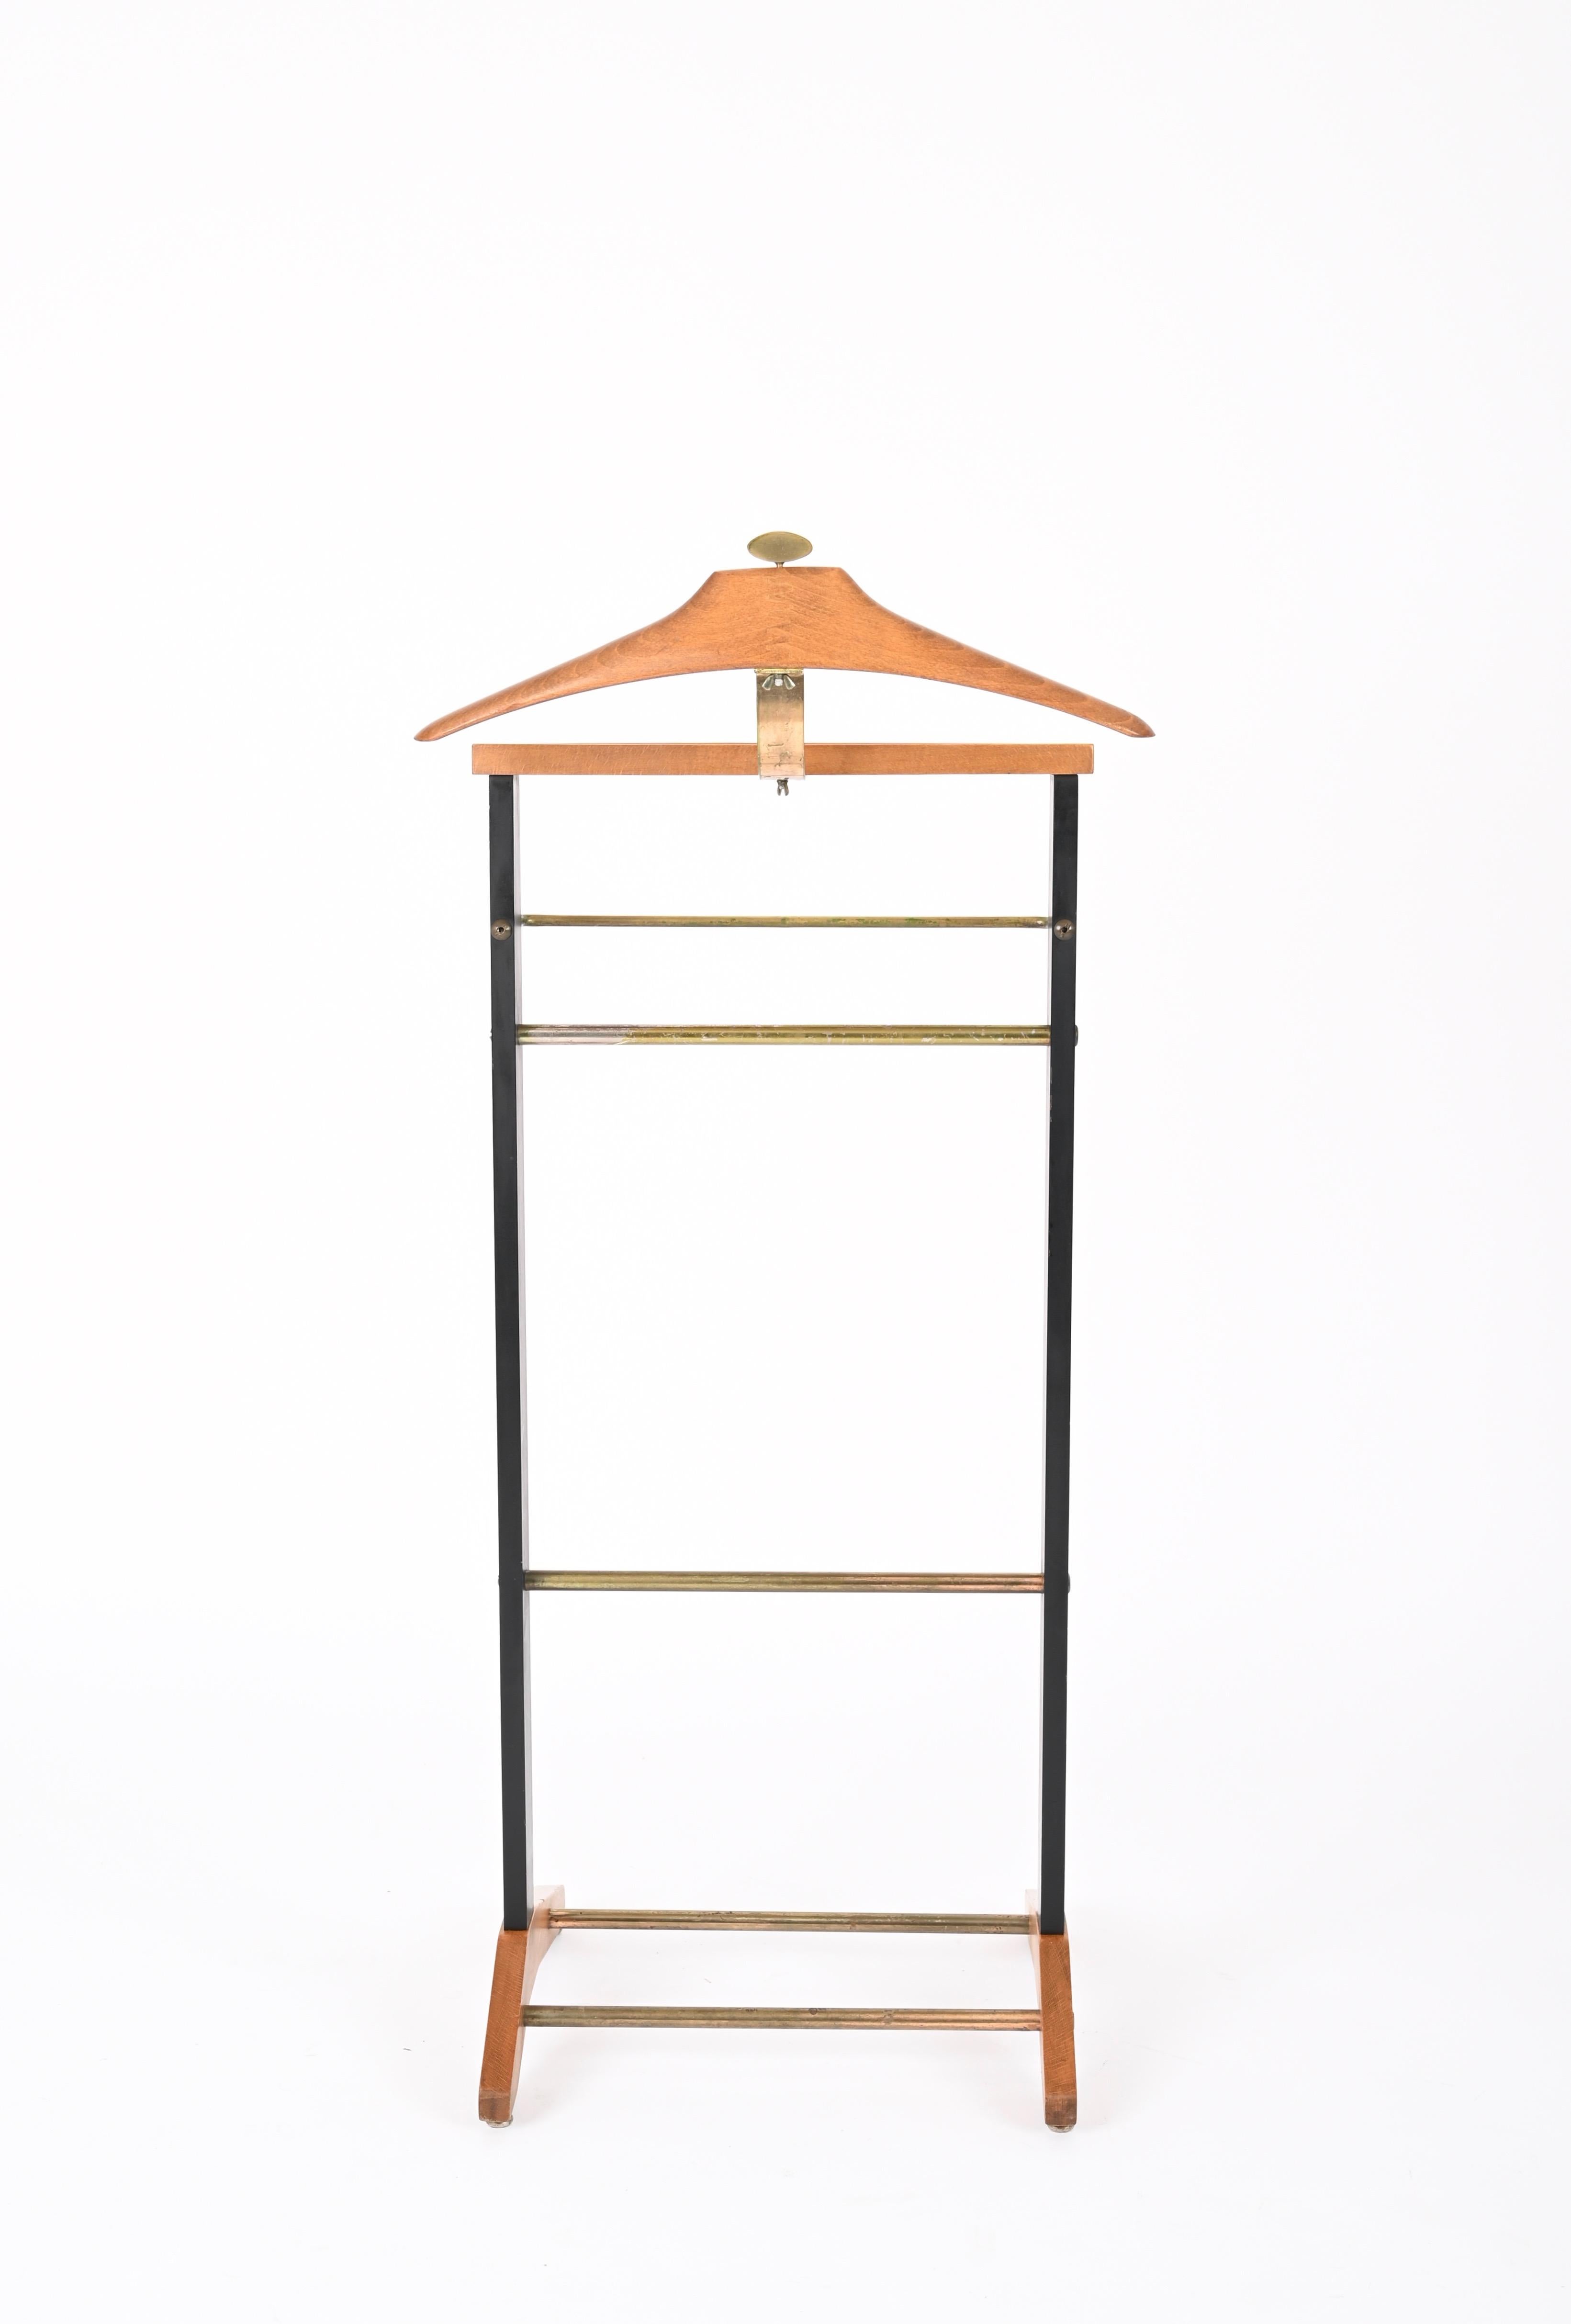 Ico Parisi Valet Beech and Brass Coat Stand for Fratelli Reguitti, Italy 1960s For Sale 7